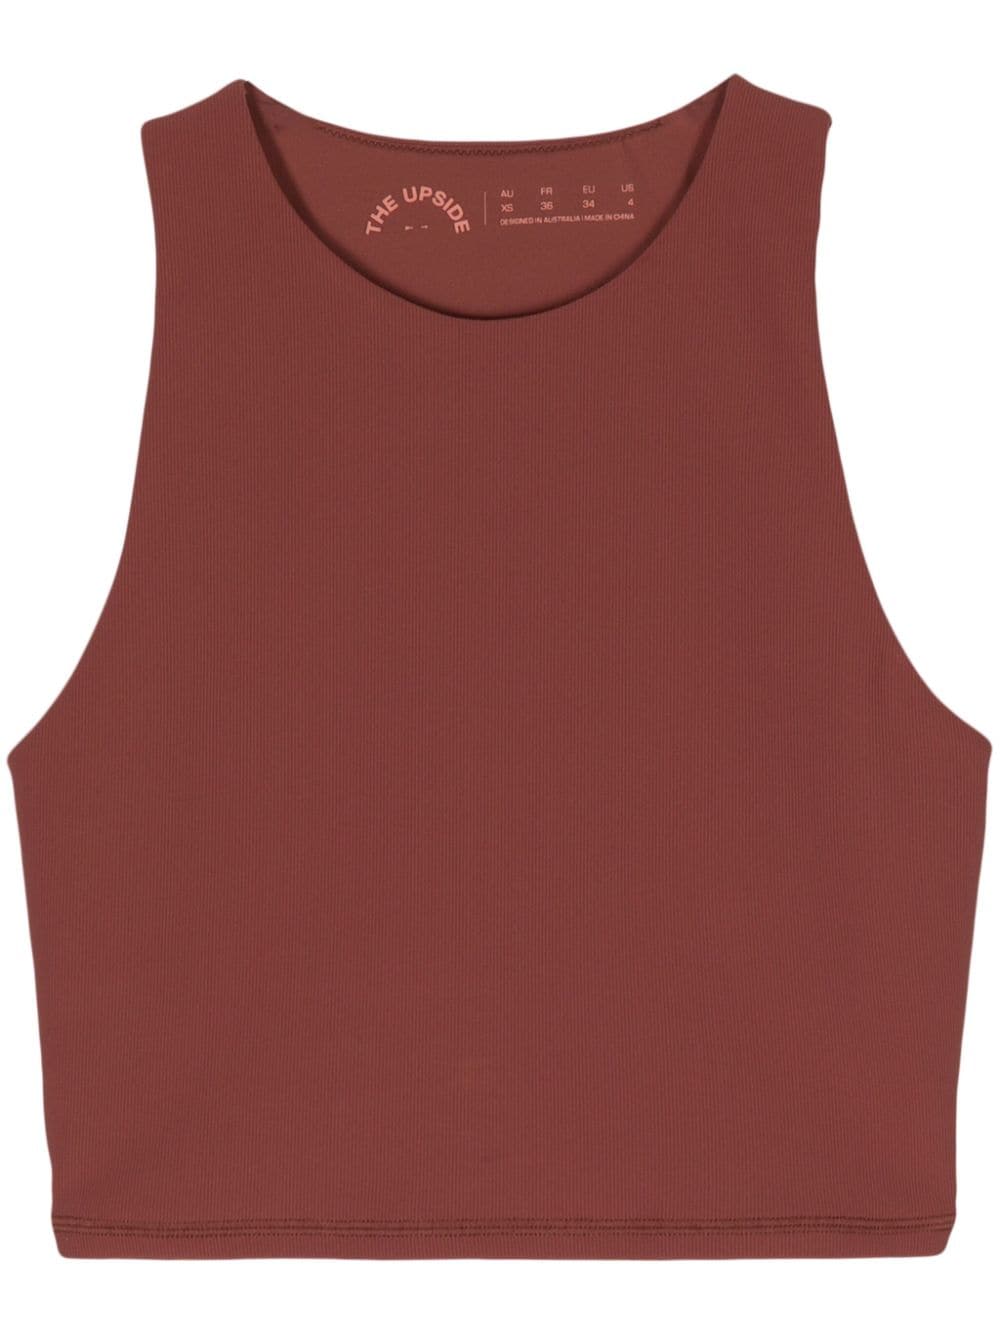 Image 1 of The Upside Jacinta ribbed cropped performance tank top